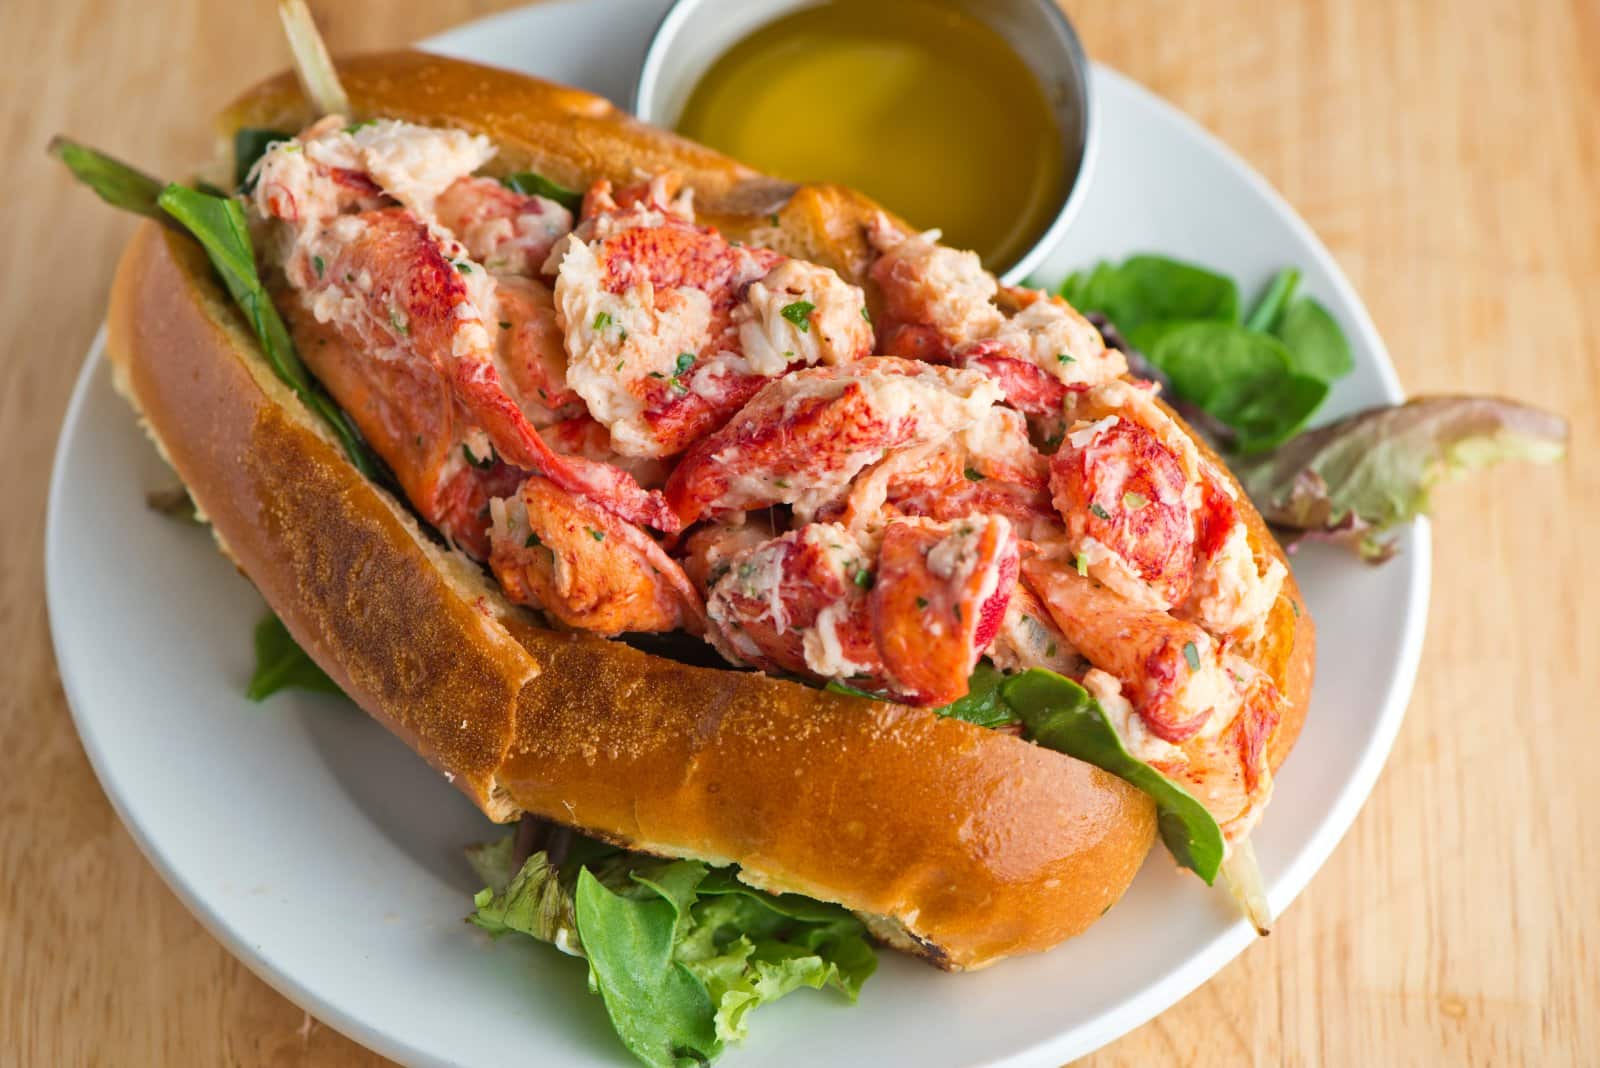 <p class="wp-caption-text">Image Credit: Shutterstock / RFondren Photography</p>  <p><span>Embark on a culinary adventure through New England to find the perfect lobster roll, a quest that combines scenic beauty with deliciousness.</span></p>